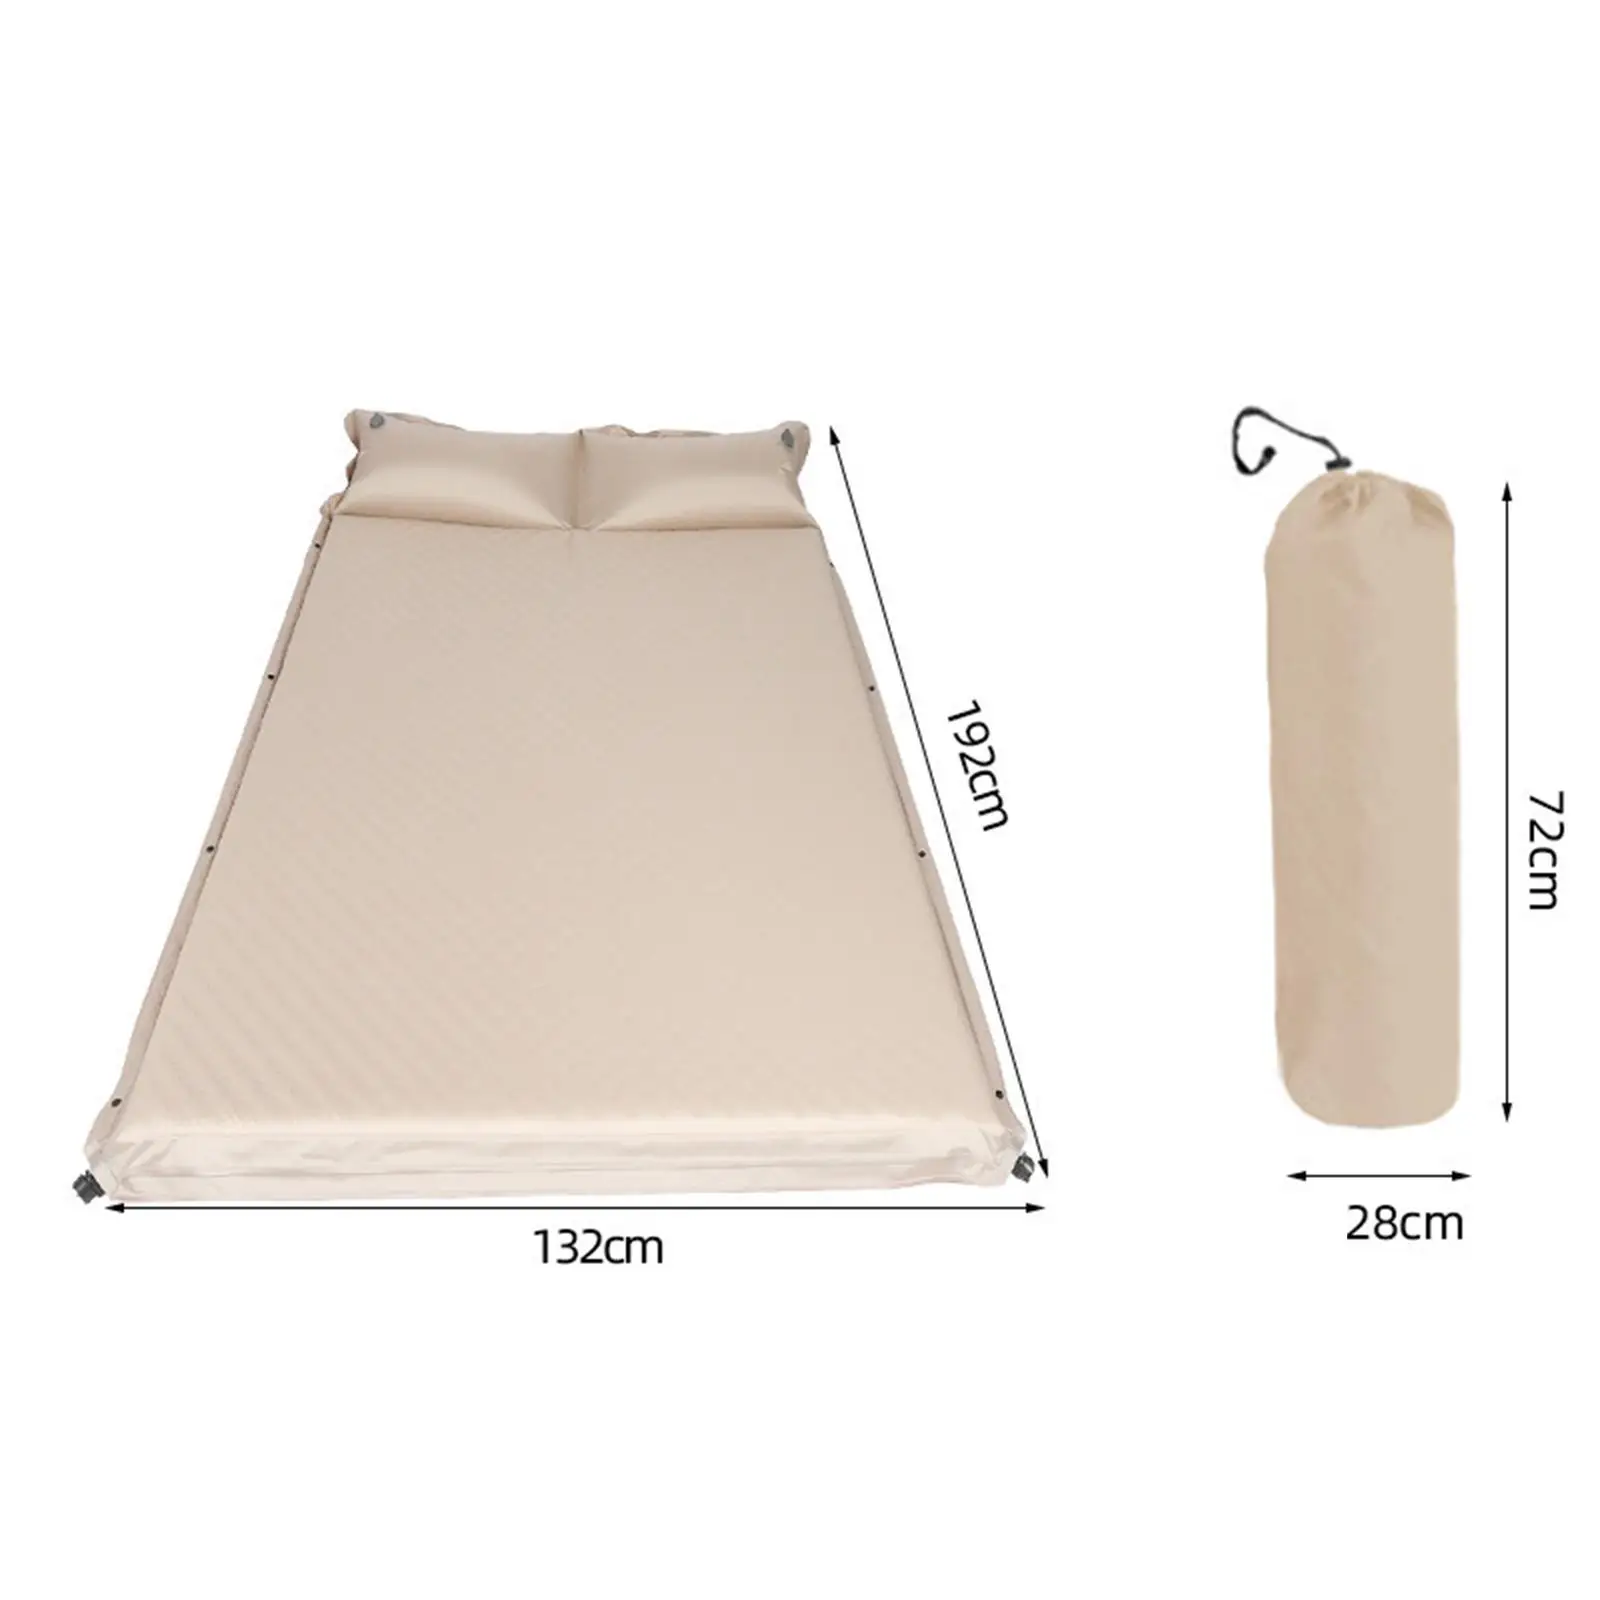 Automatic Inflatable Mattress Compact Cushion Camping Sleeping Pad with Pillow for Travel Hiking Backpacking Tent Picnic